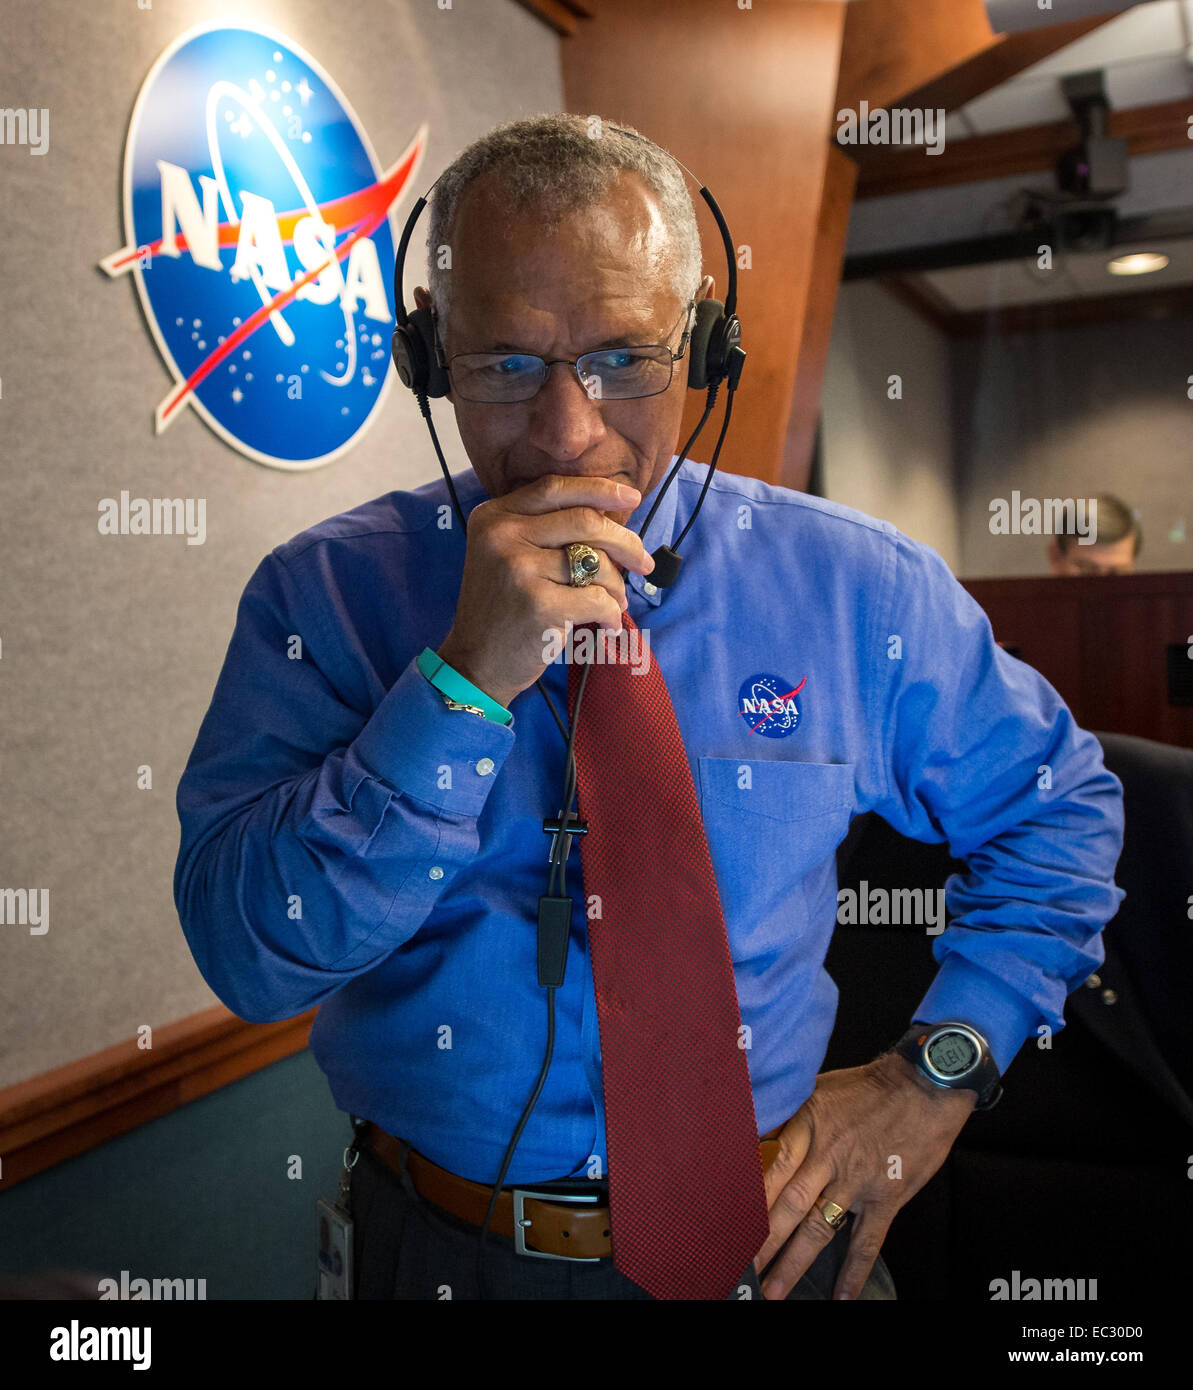 NASA Administrator Charles Bolden pauses for a moment in Building AE at Cape Canaveral Air Force Station after having watched and celebrated the Orion spacecraft splash down in the Pacific Ocean more than three hours after the spacecraft launched onboard a United Launch Alliance Delta IV Heavy rocket from Launch Complex 37, Friday, Dec. 5, 2014, Cape Canaveral, Florida. The Orion spacecraft orbited Earth twice, reaching an altitude of approximately 3,600 miles above Earth before landing. No one was aboard Orion for this flight test, but the spacecraft is designed to allow us to journey to dest Stock Photo